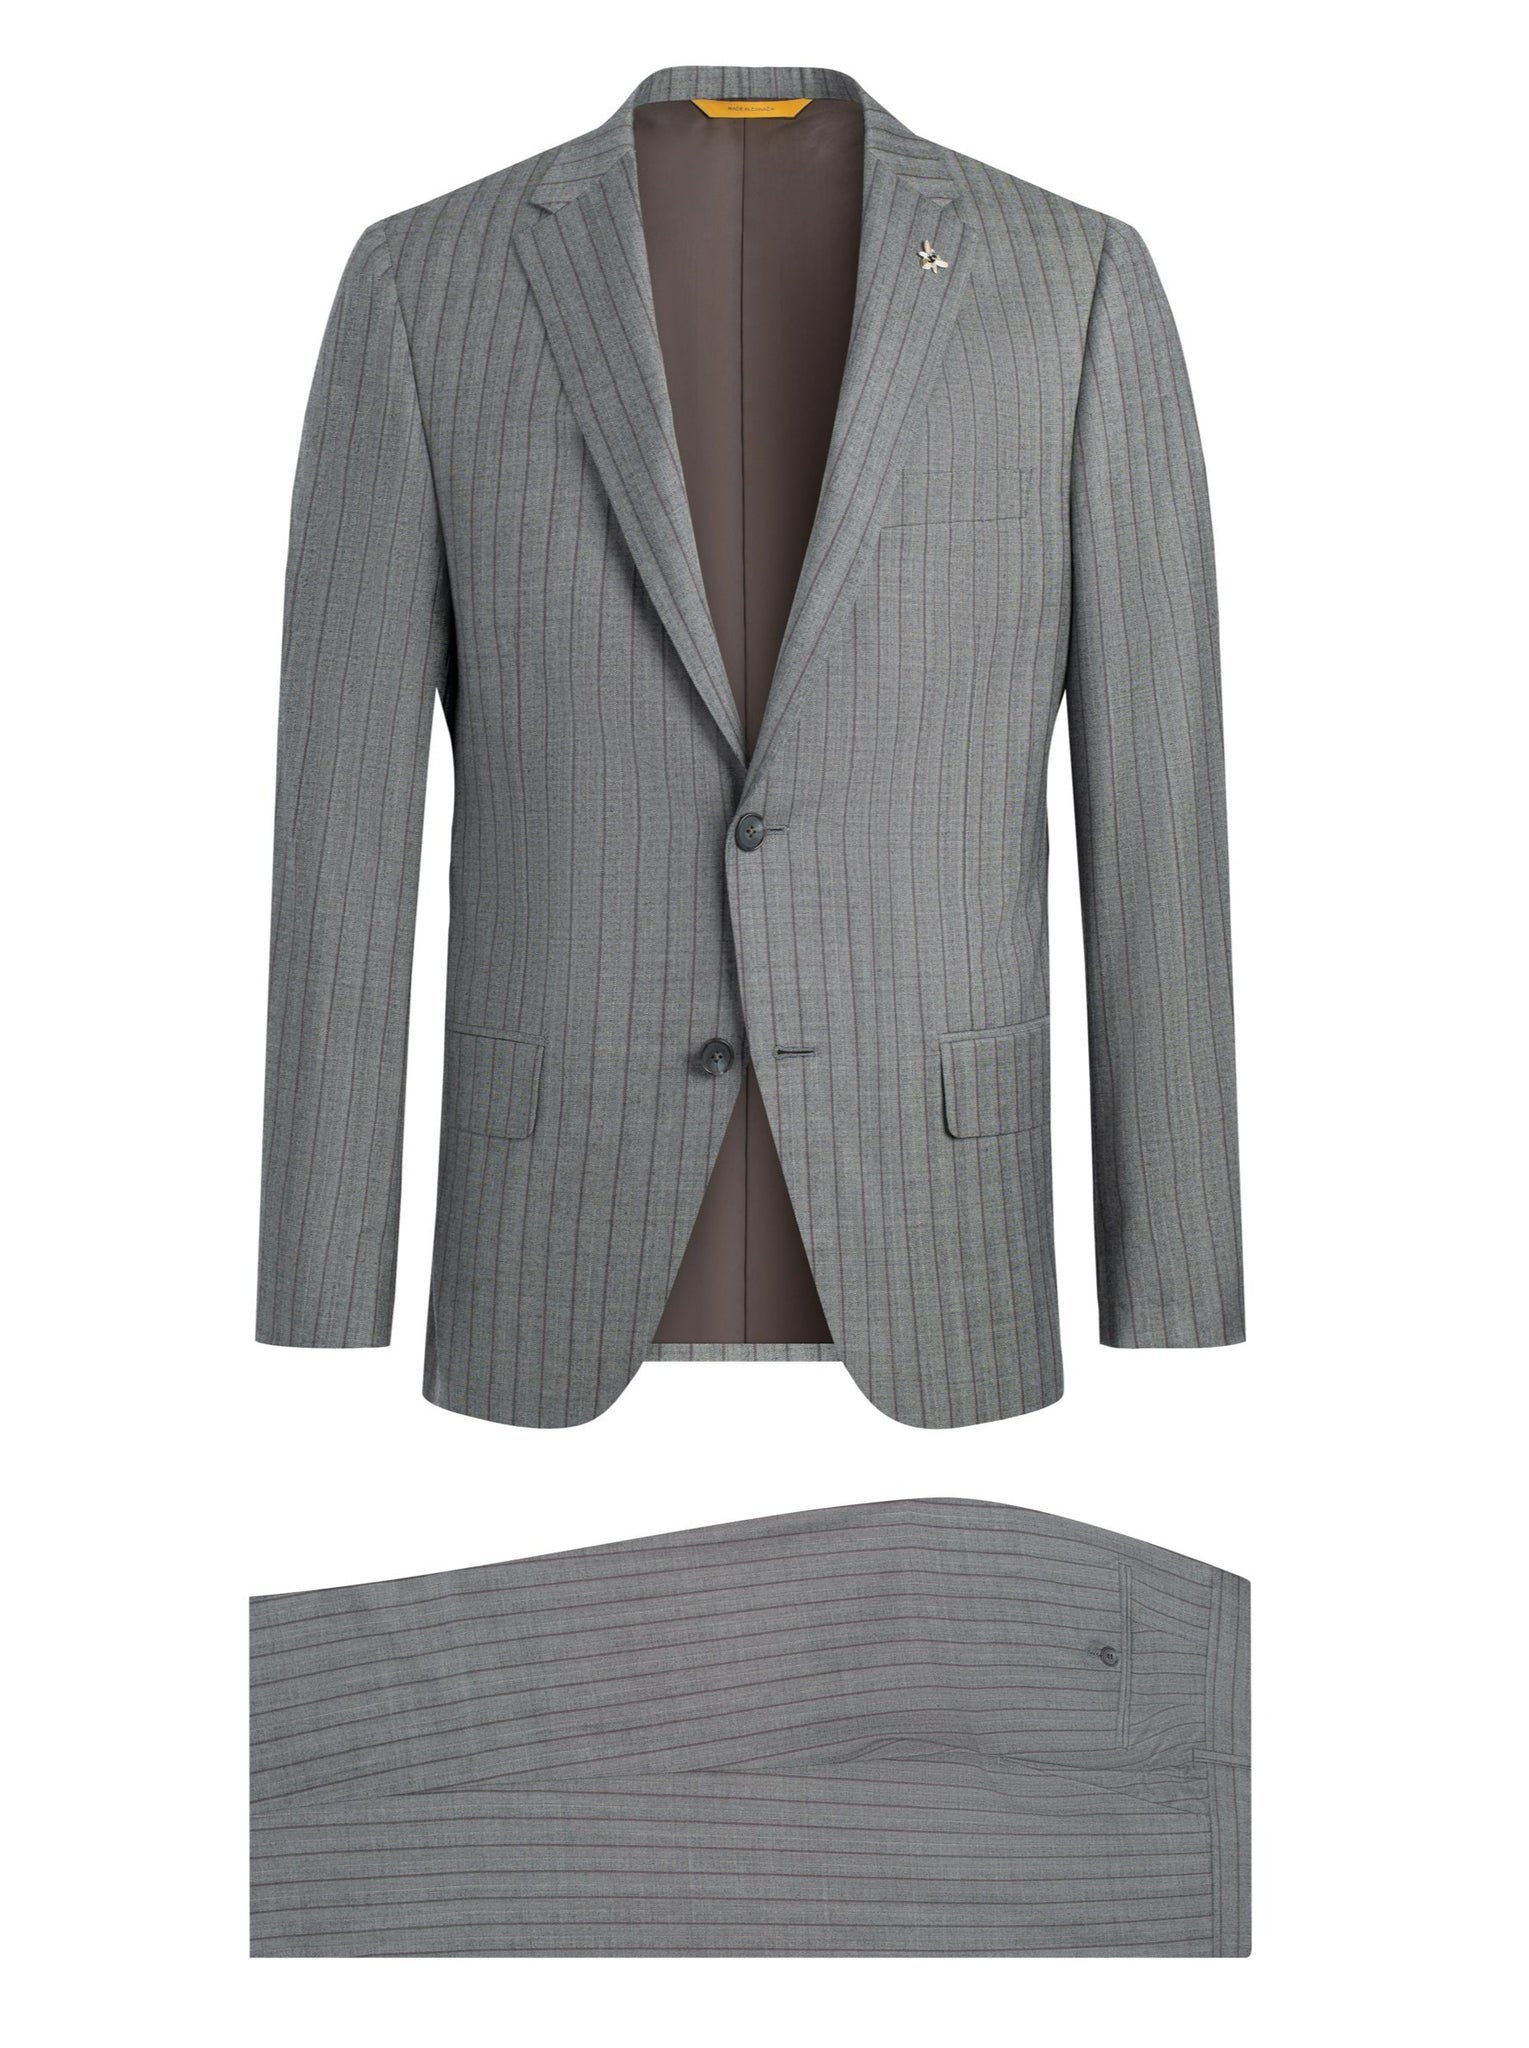 Hickey Freeman | Men's Tailored Clothing, Suits at Hickey Freeman